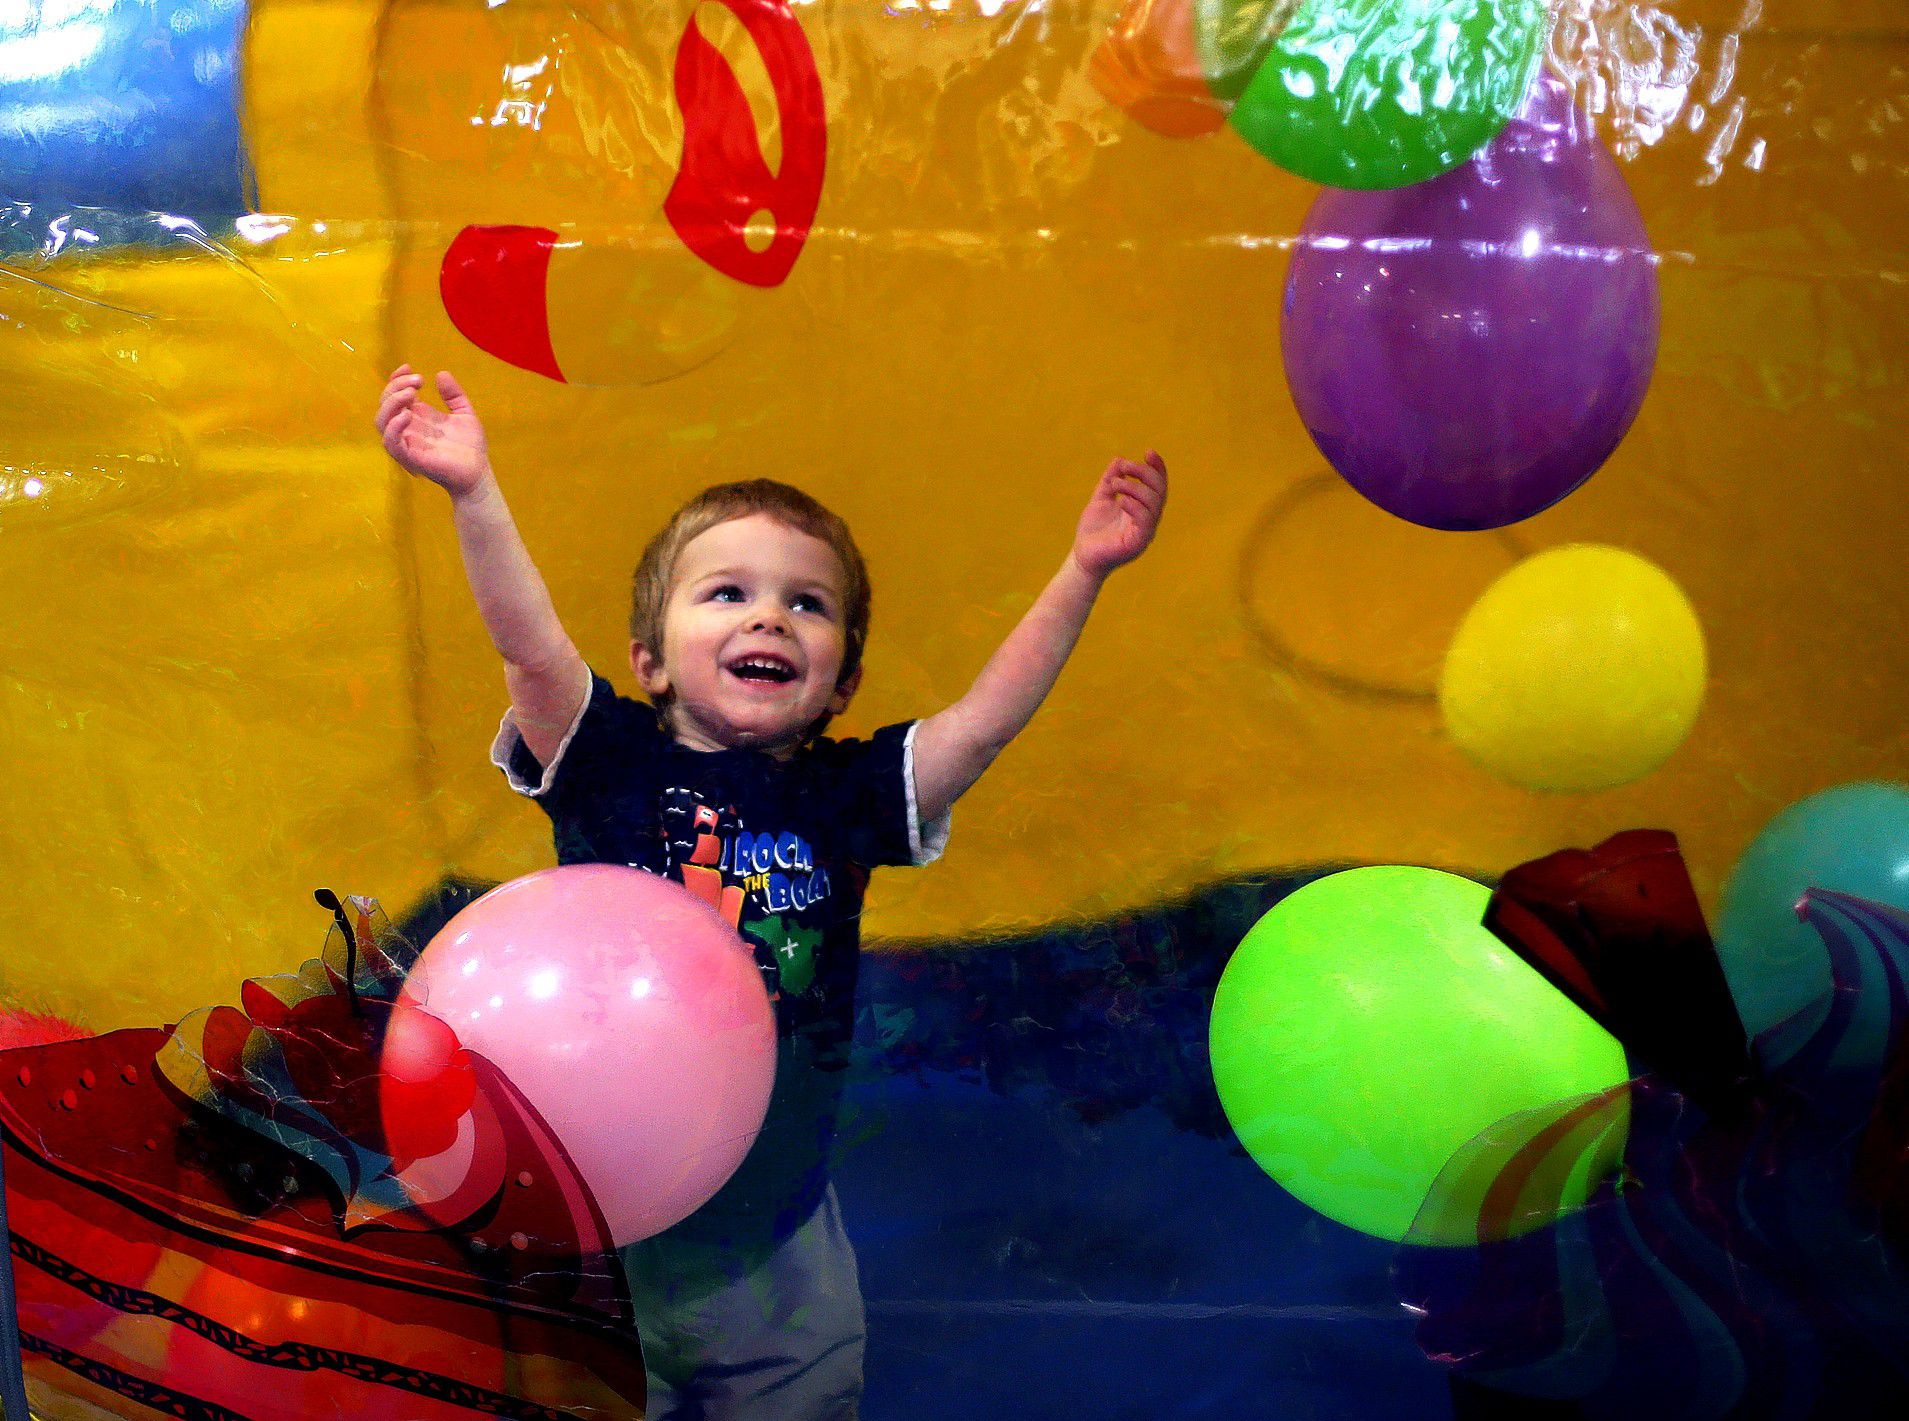 Zeke Harmon, 3, plays with balloons inside a bouncy house at the Krazy Kids indoor play center in Concord  with his family Monday. (GEOFF FORESTER / Monitor staff) 